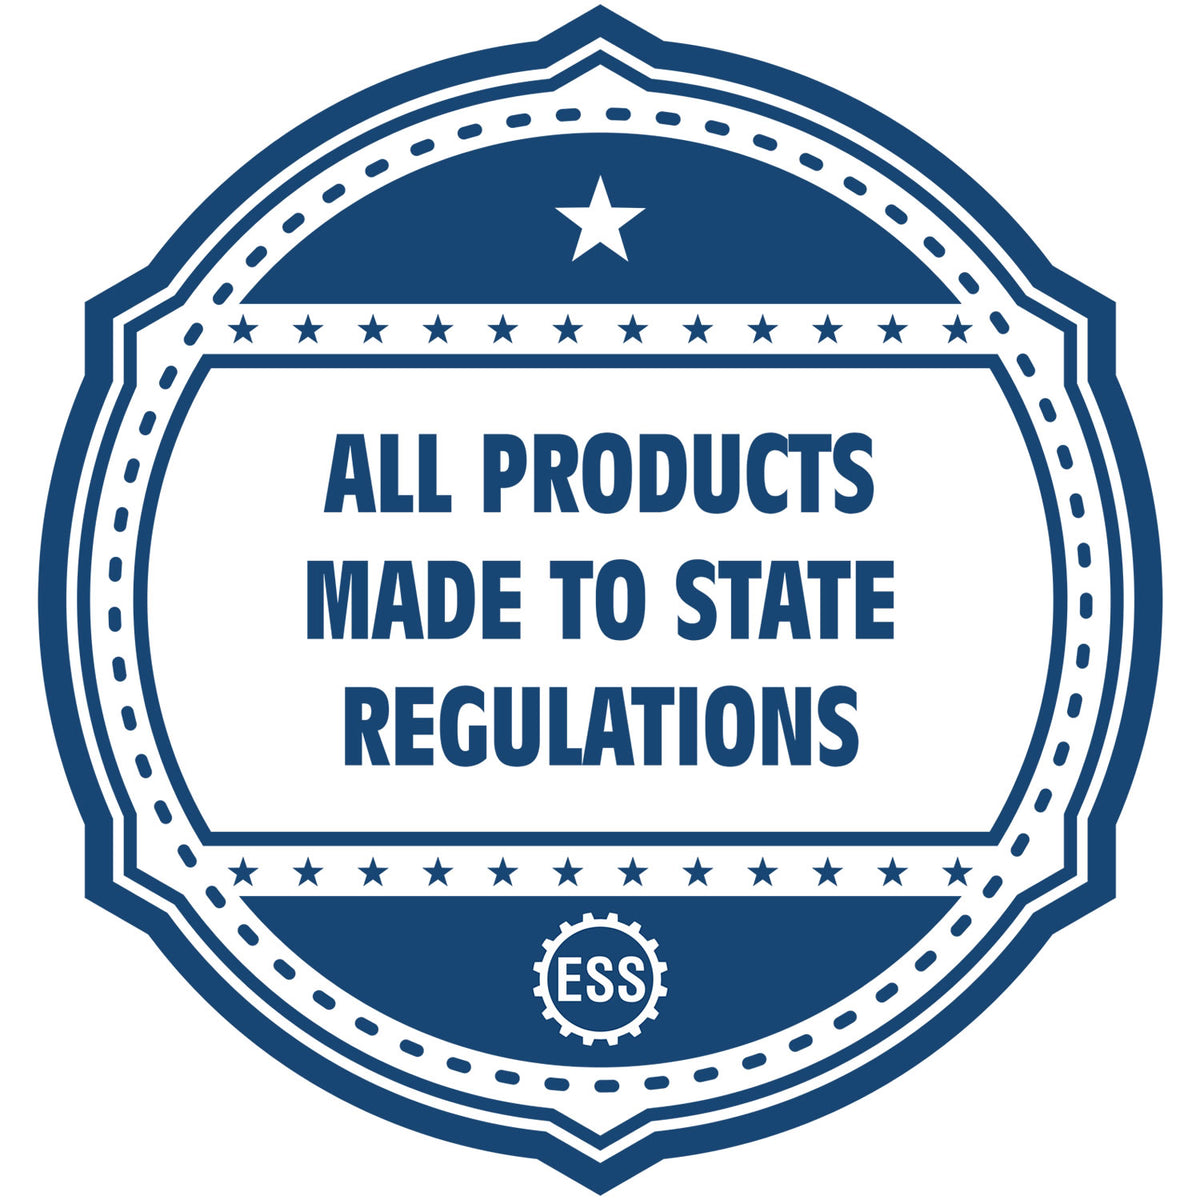 A blue icon or badge for the Hybrid Delaware Landscape Architect Seal showing that this product is made in compliance with state regulations.